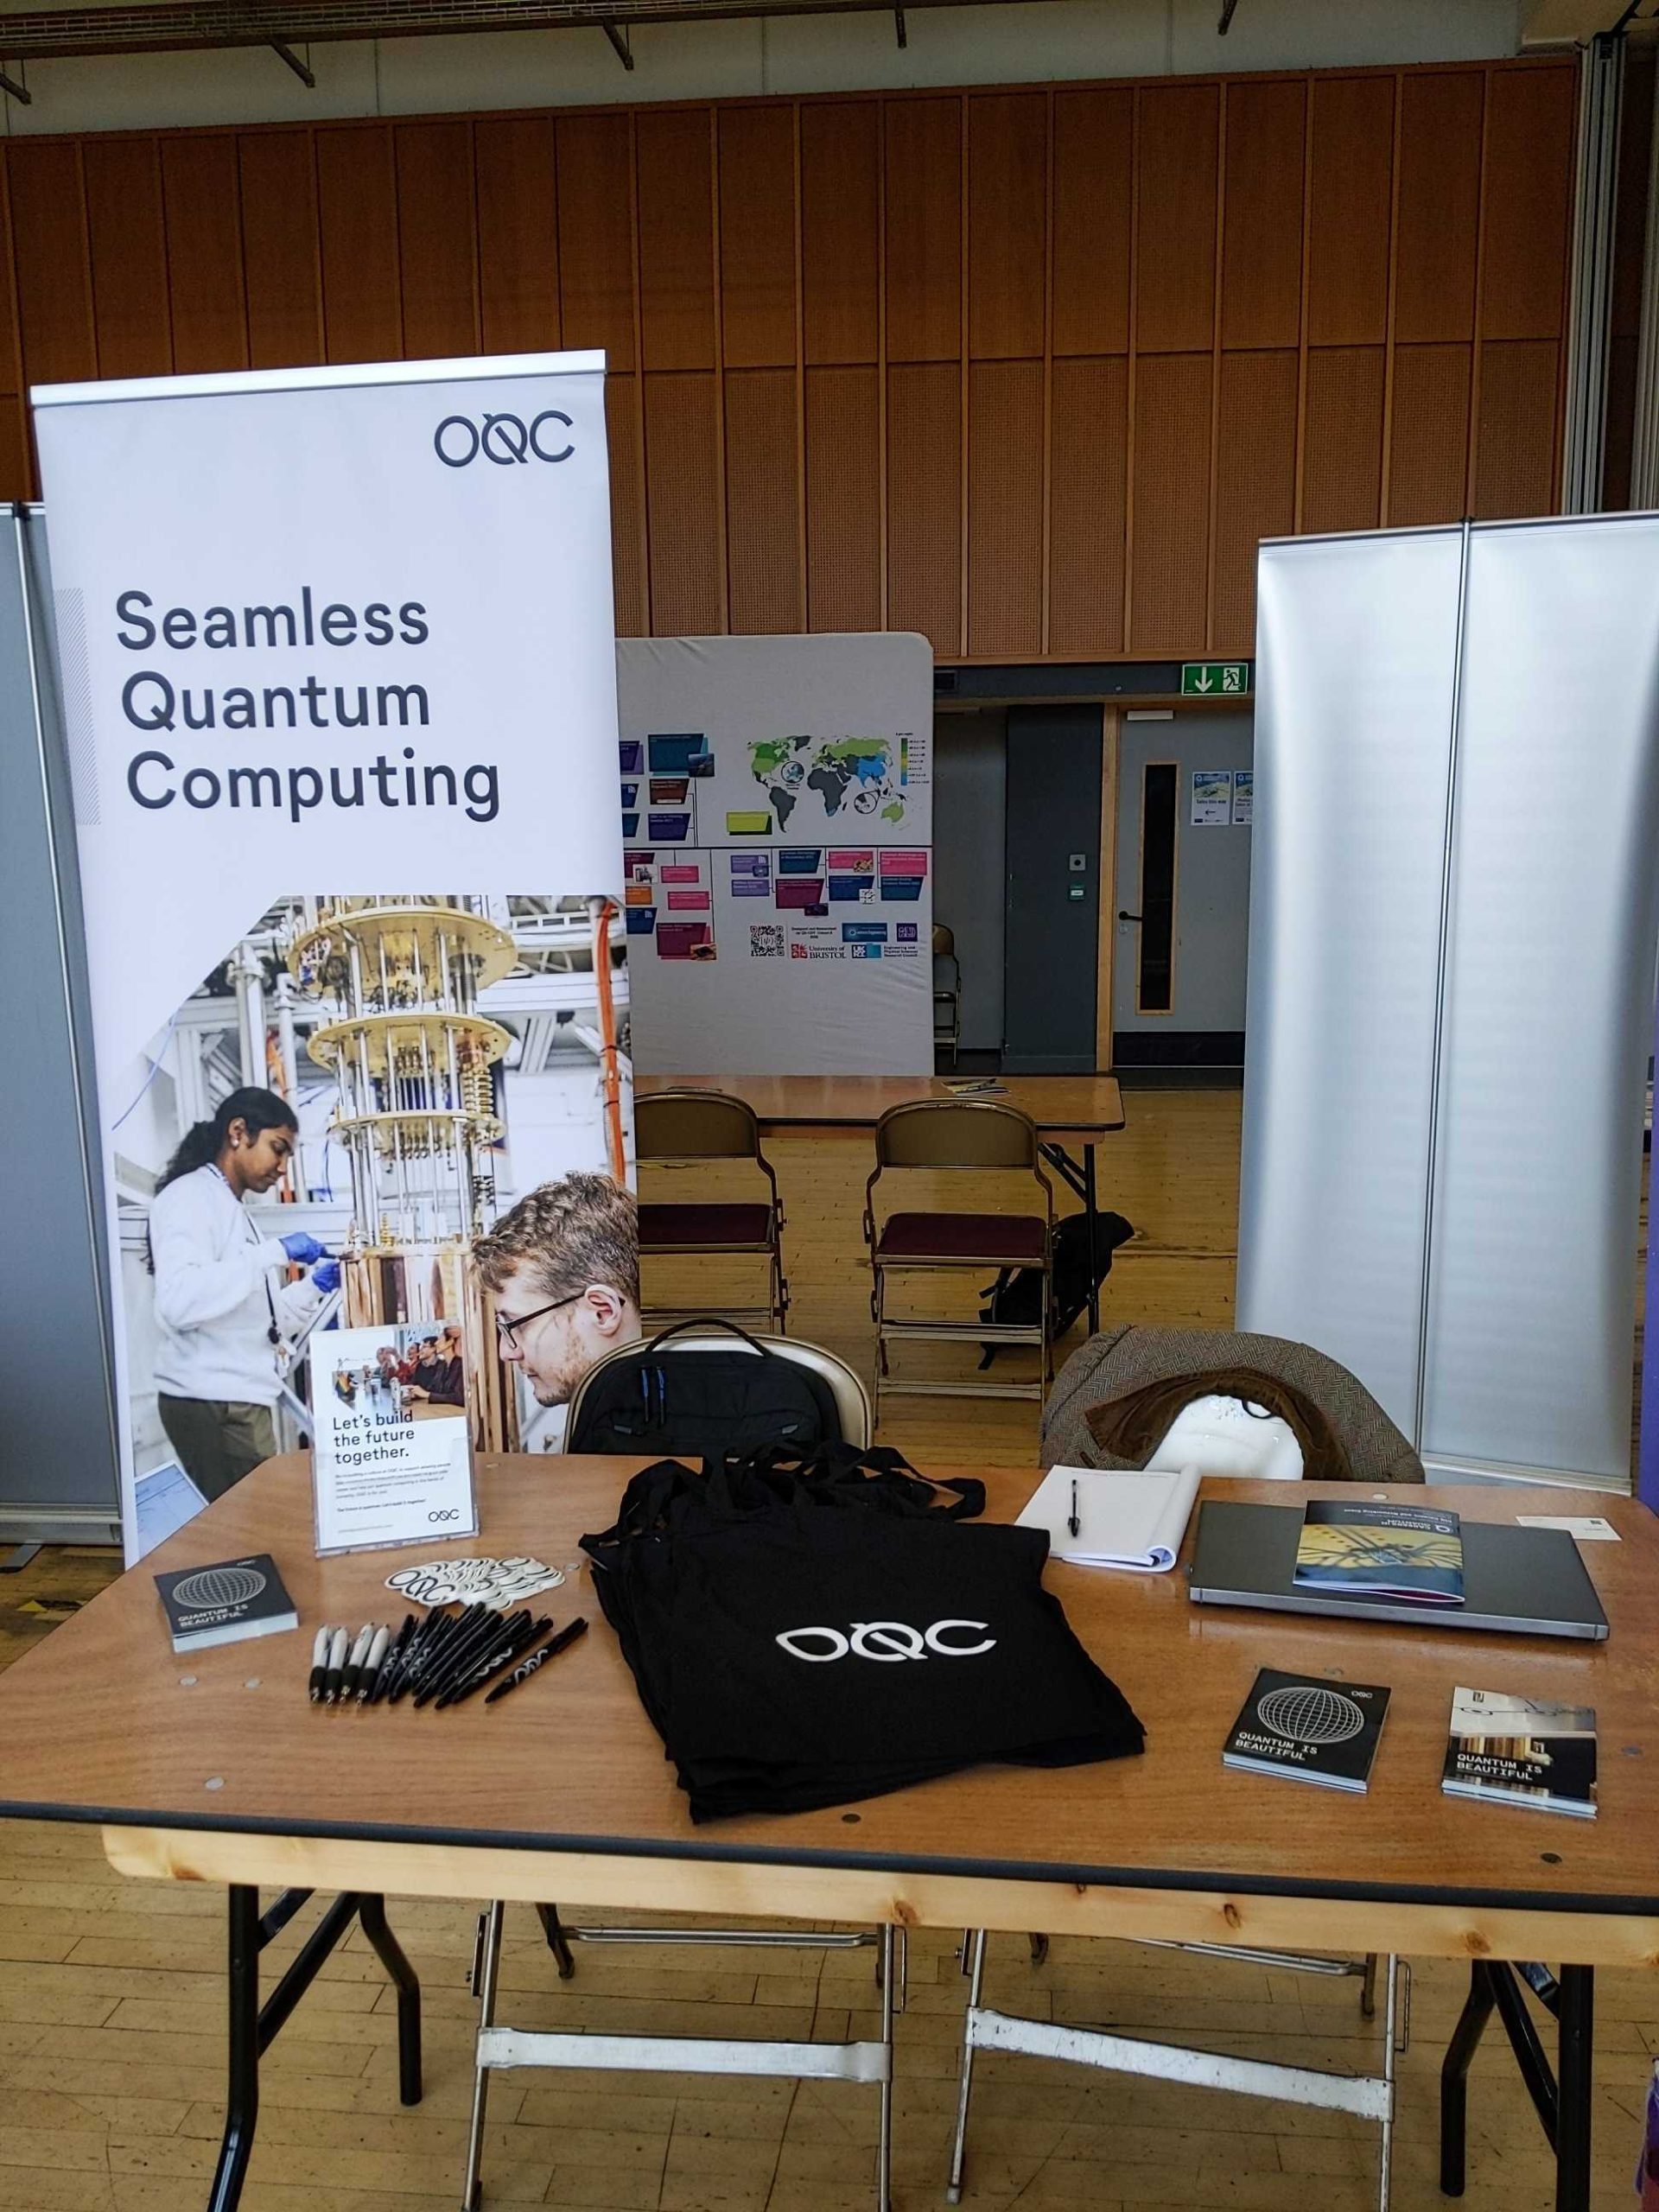 The OQC stand at Bristol's Careers in Quantum event